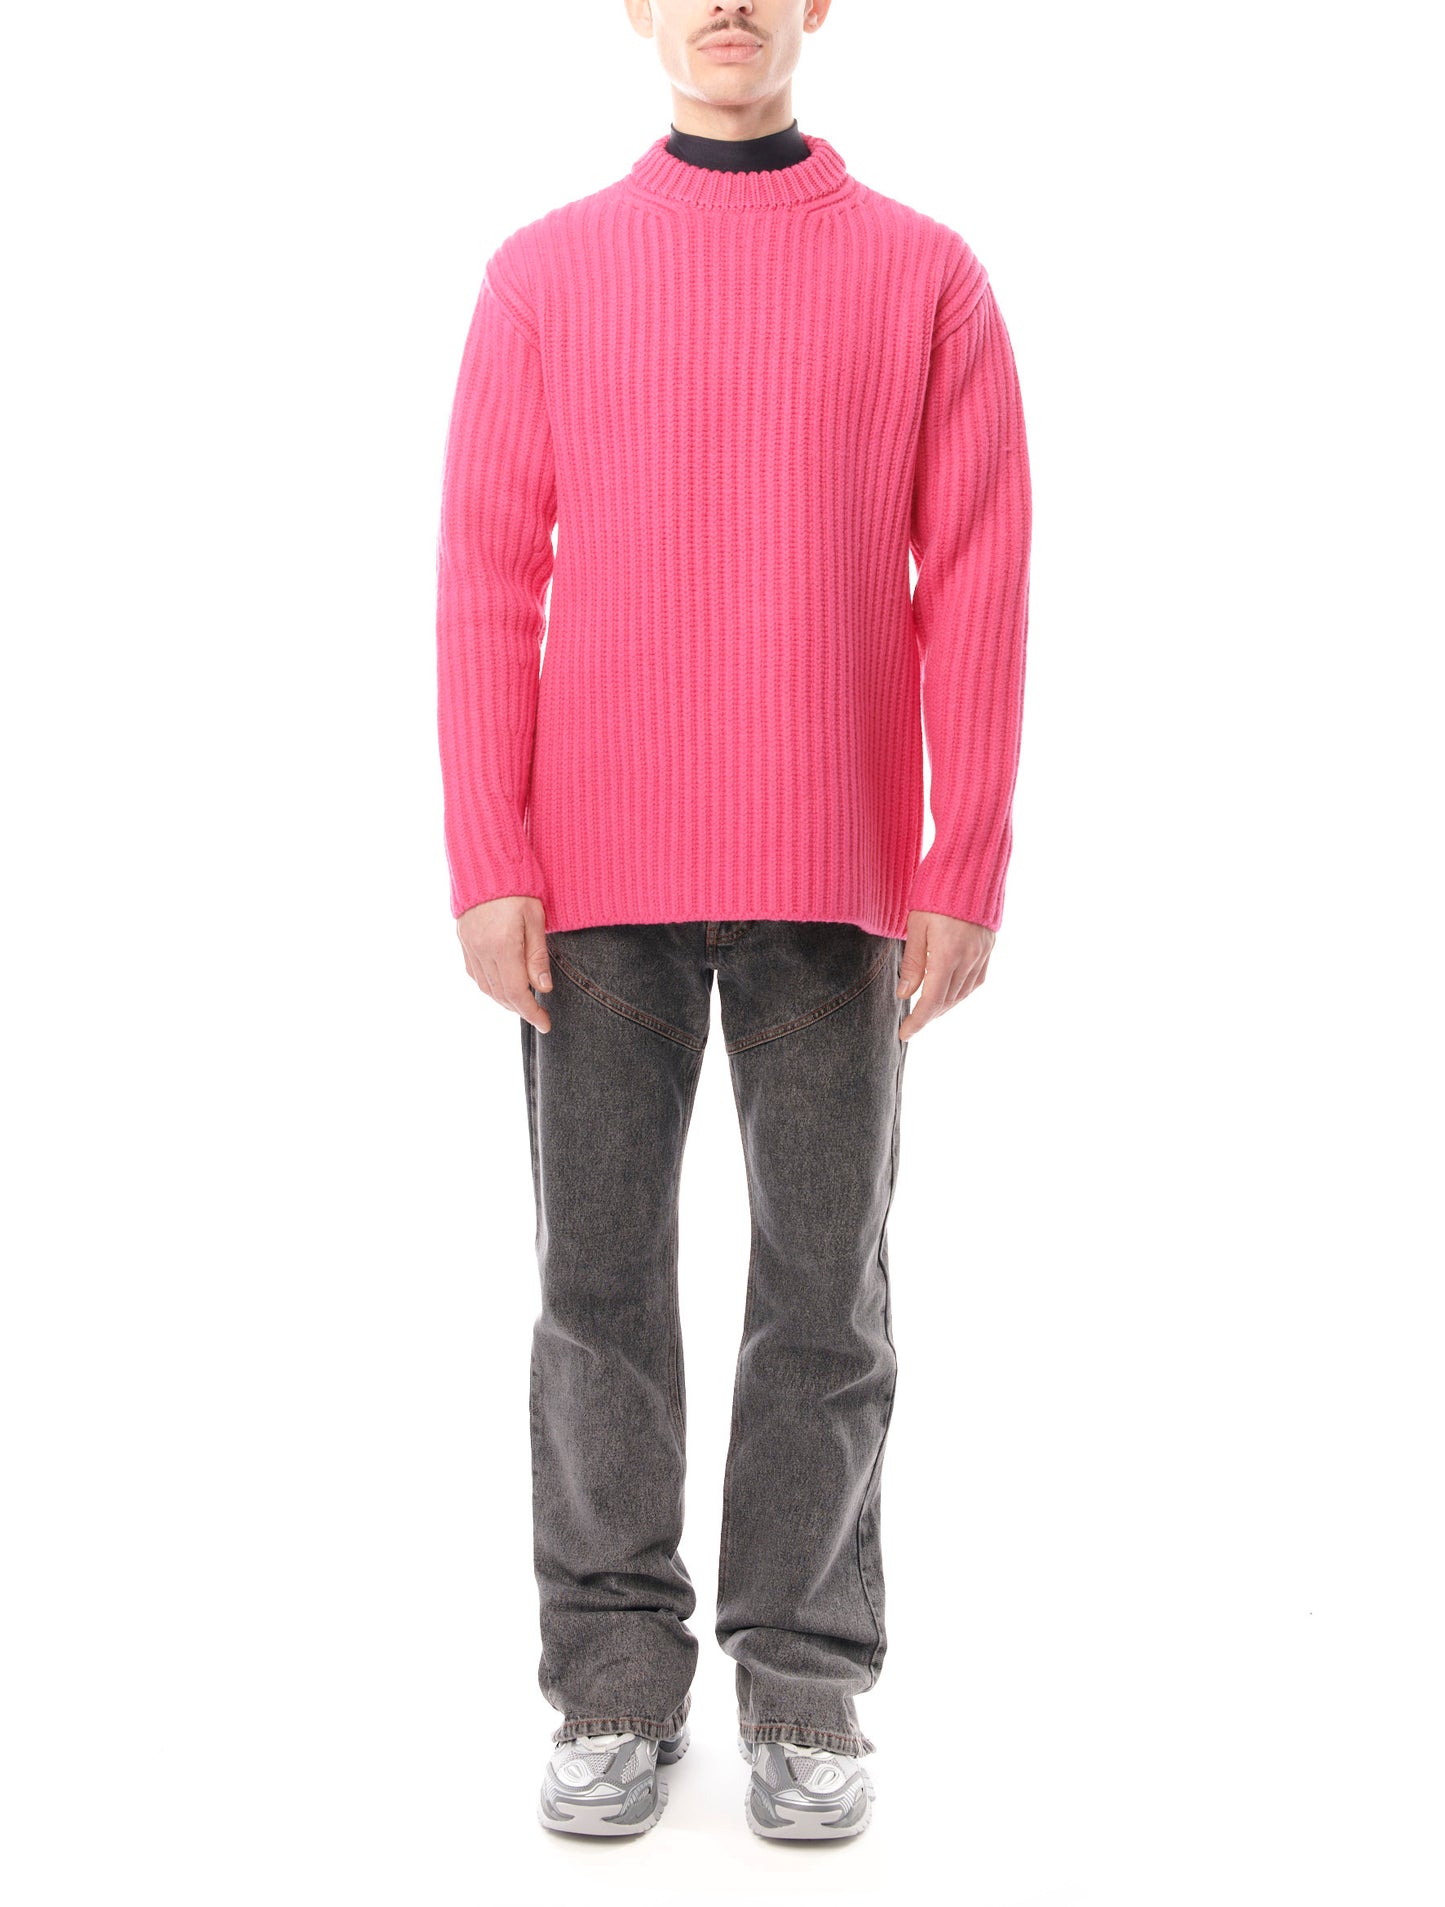 Botter Ribbed Trompe-l’oeil Pink Sweater